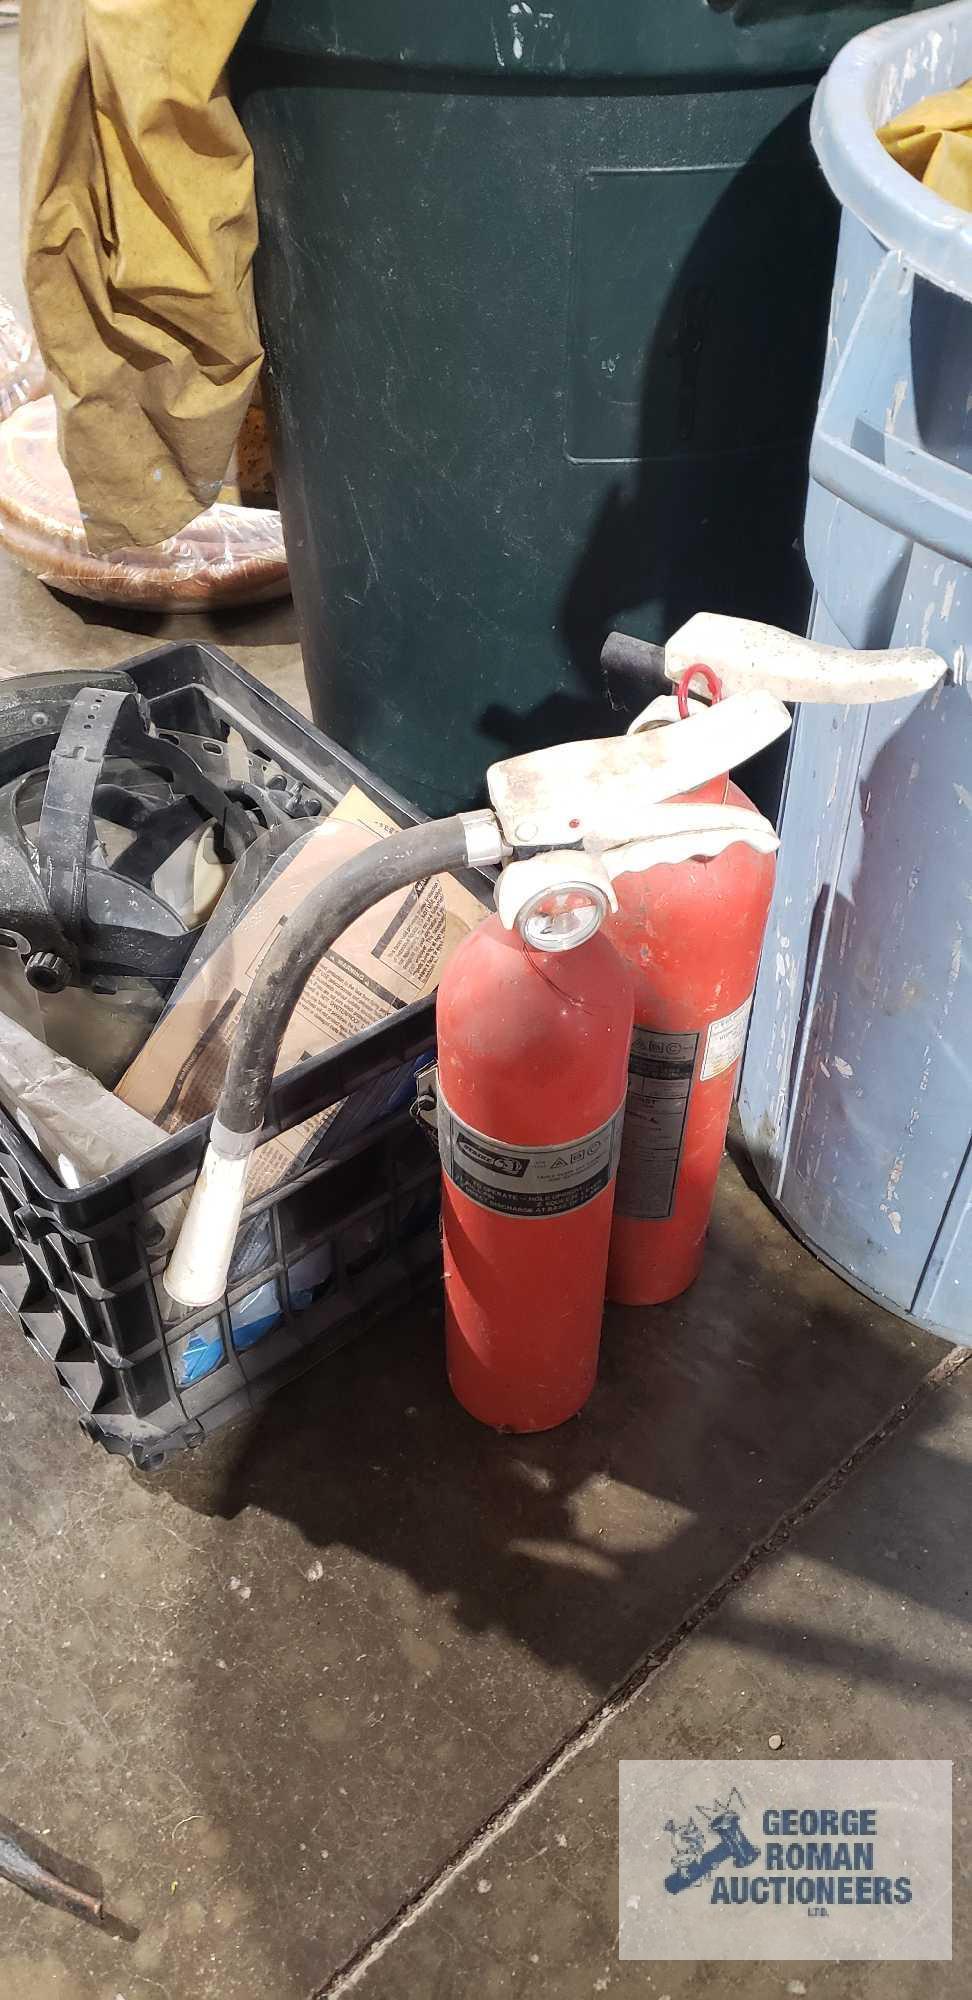 Lot of rain gear, safety shield masks and fire extinguishers